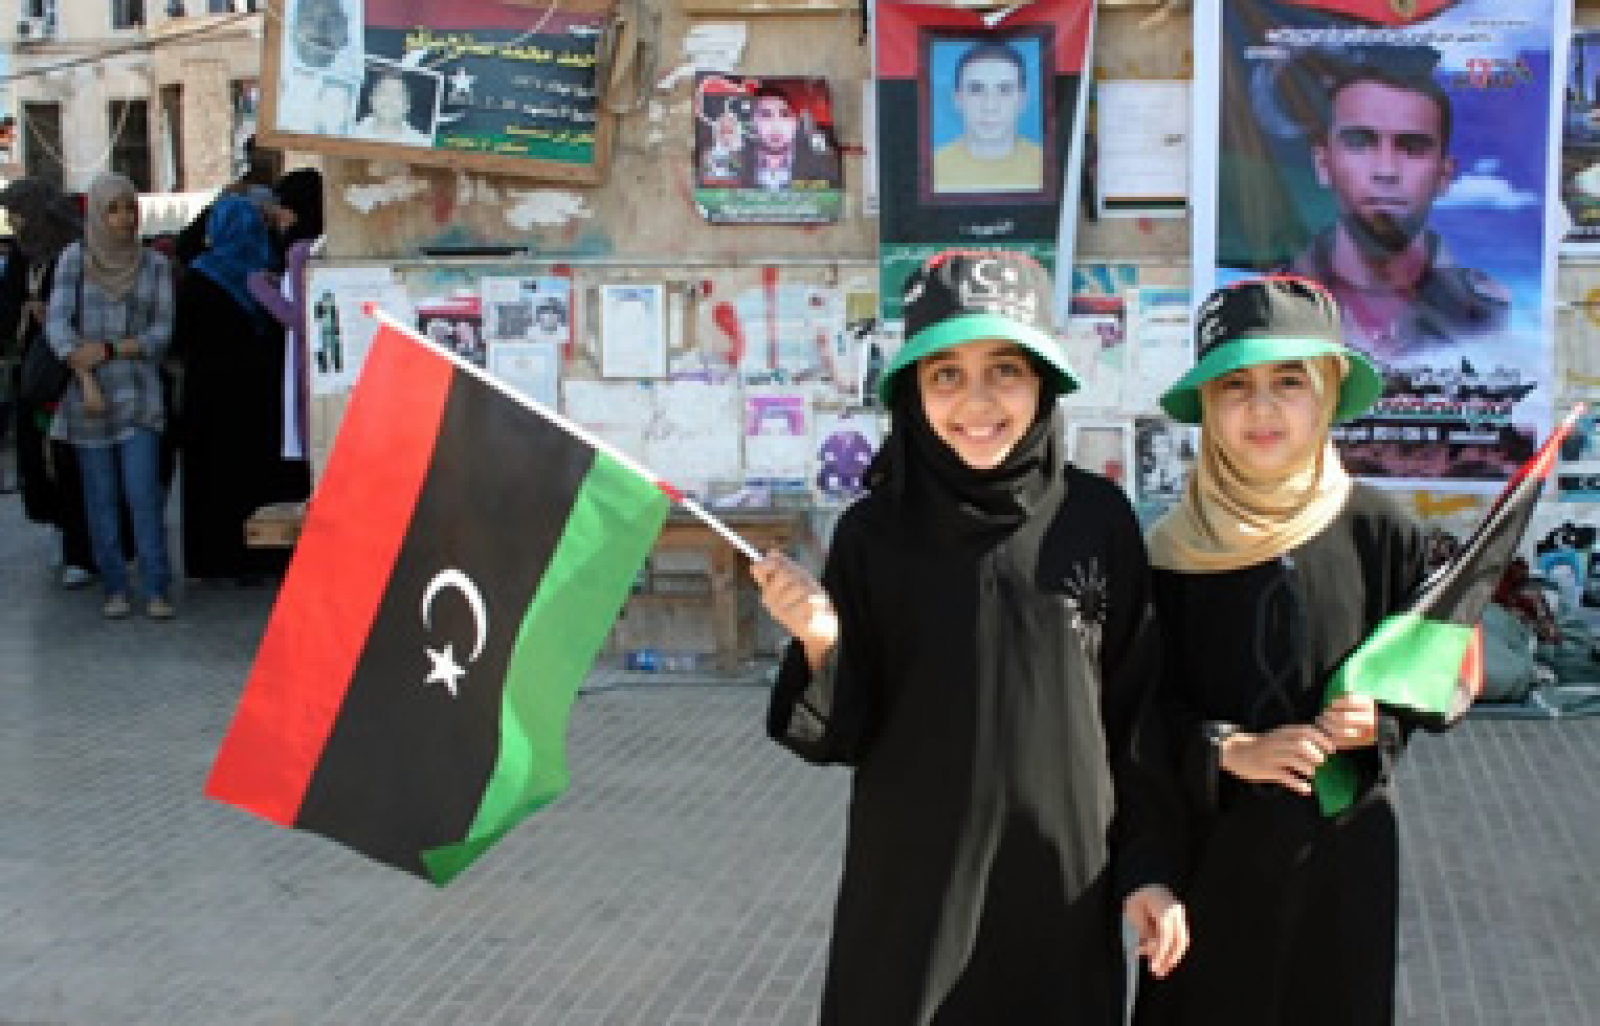 With Elections in Sight, Libyans Concerned about Security, Country's Direction